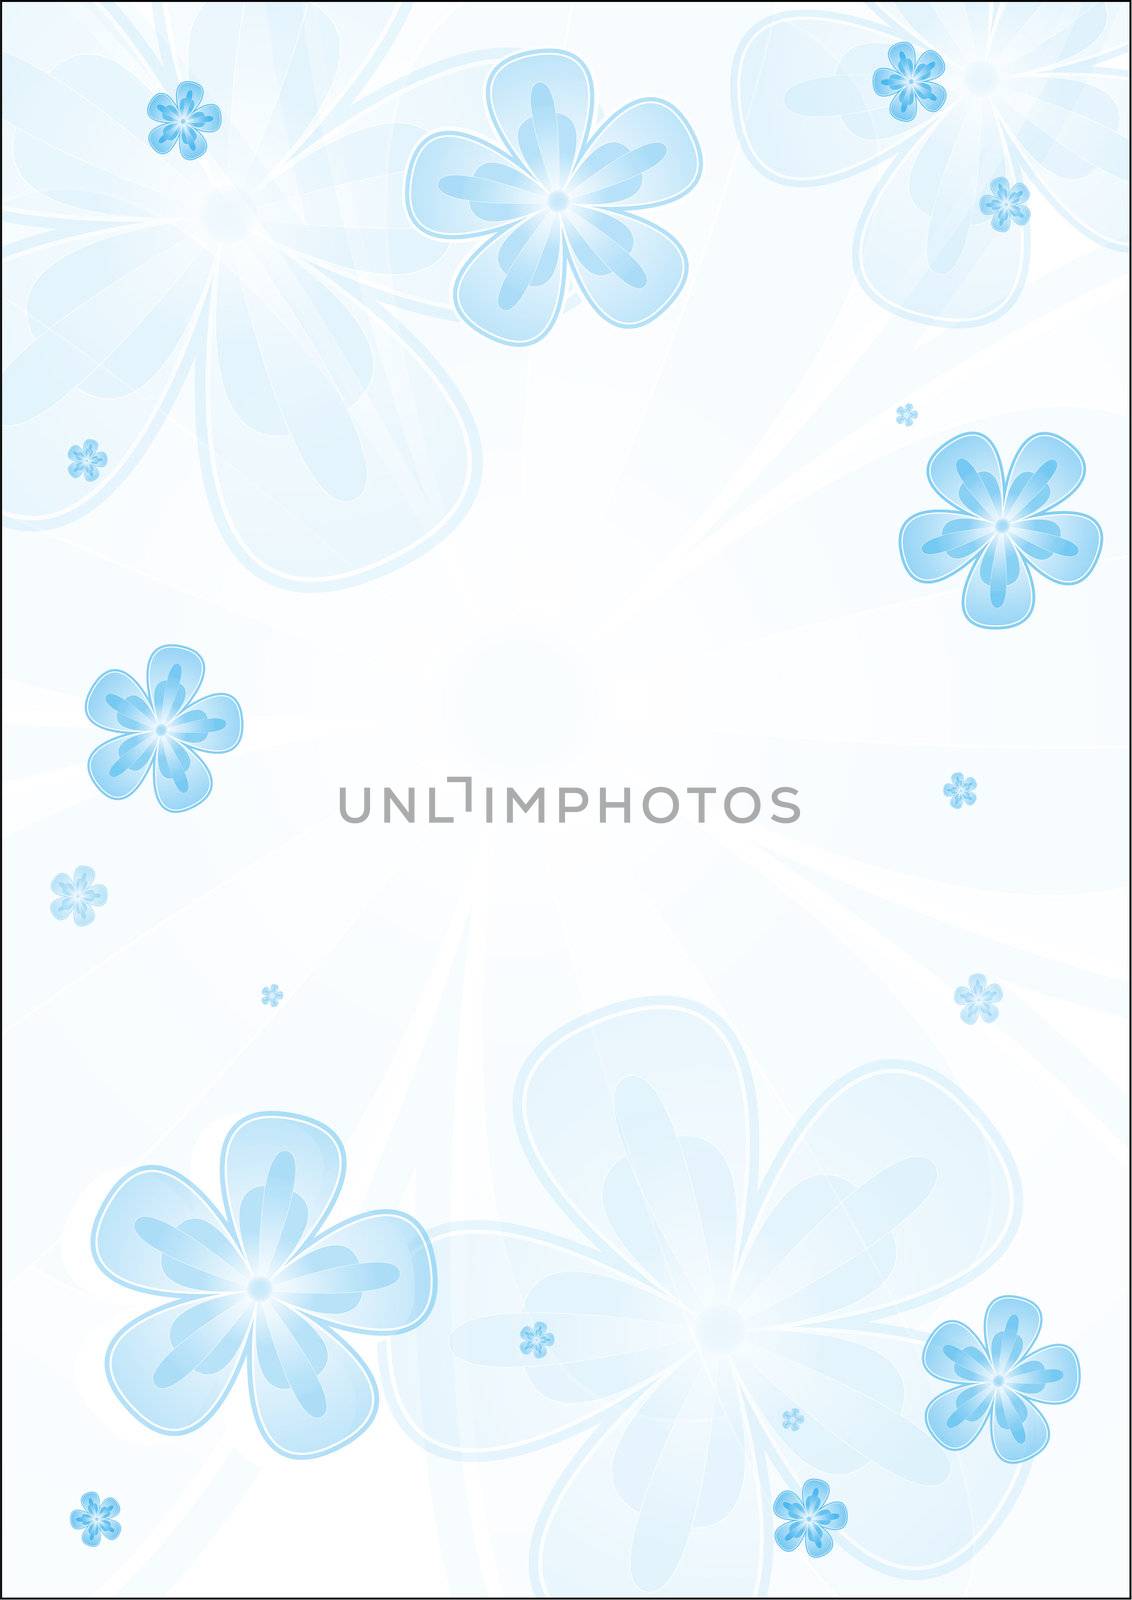 an abstract background with some transparent blue flowers
